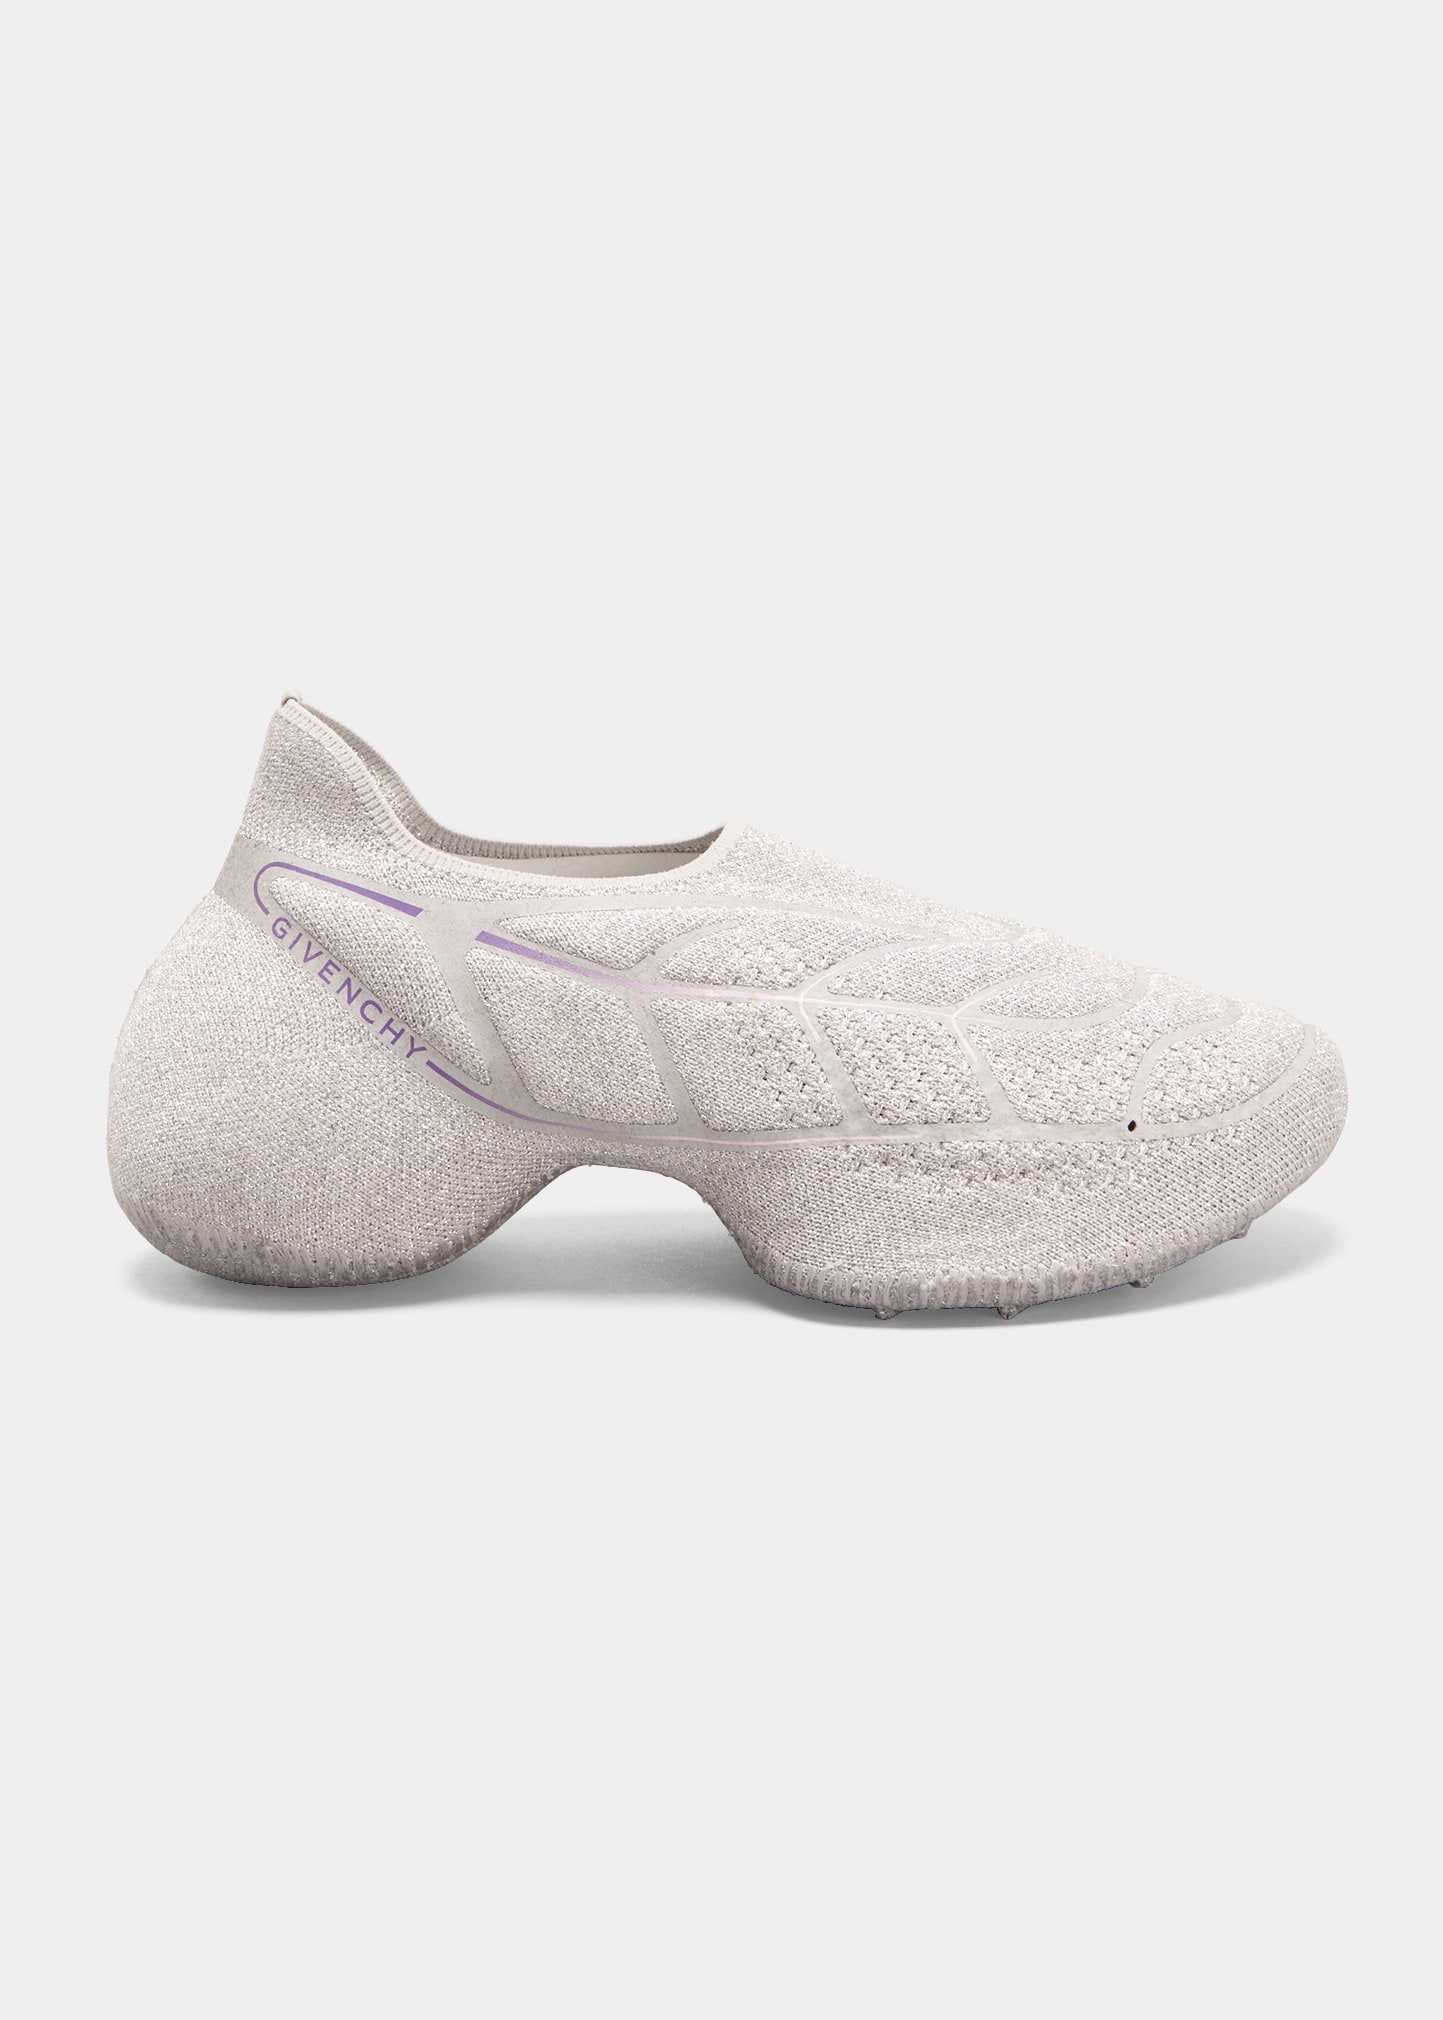 Givenchy TK-360 Plus Knit Slip-On Sneakers